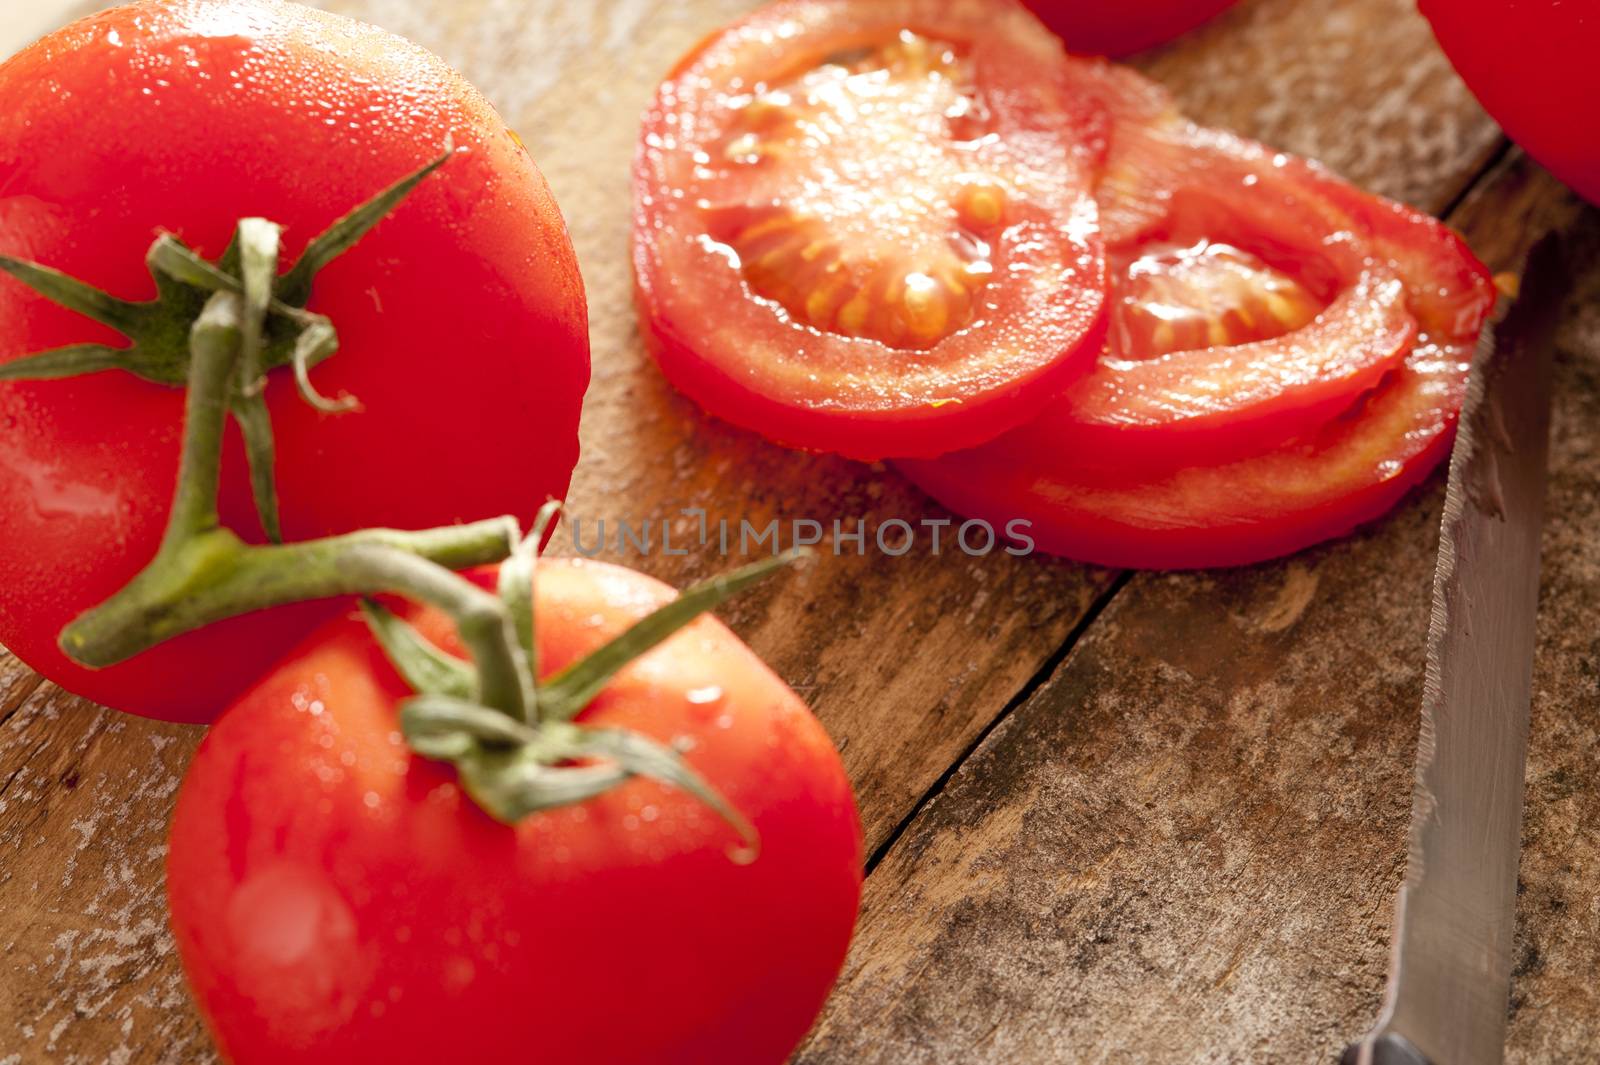 Whole and sliced juicy ripe red tomatoes on the vine on a rustic kitchen table with a knife being prepared for a salad or cooking